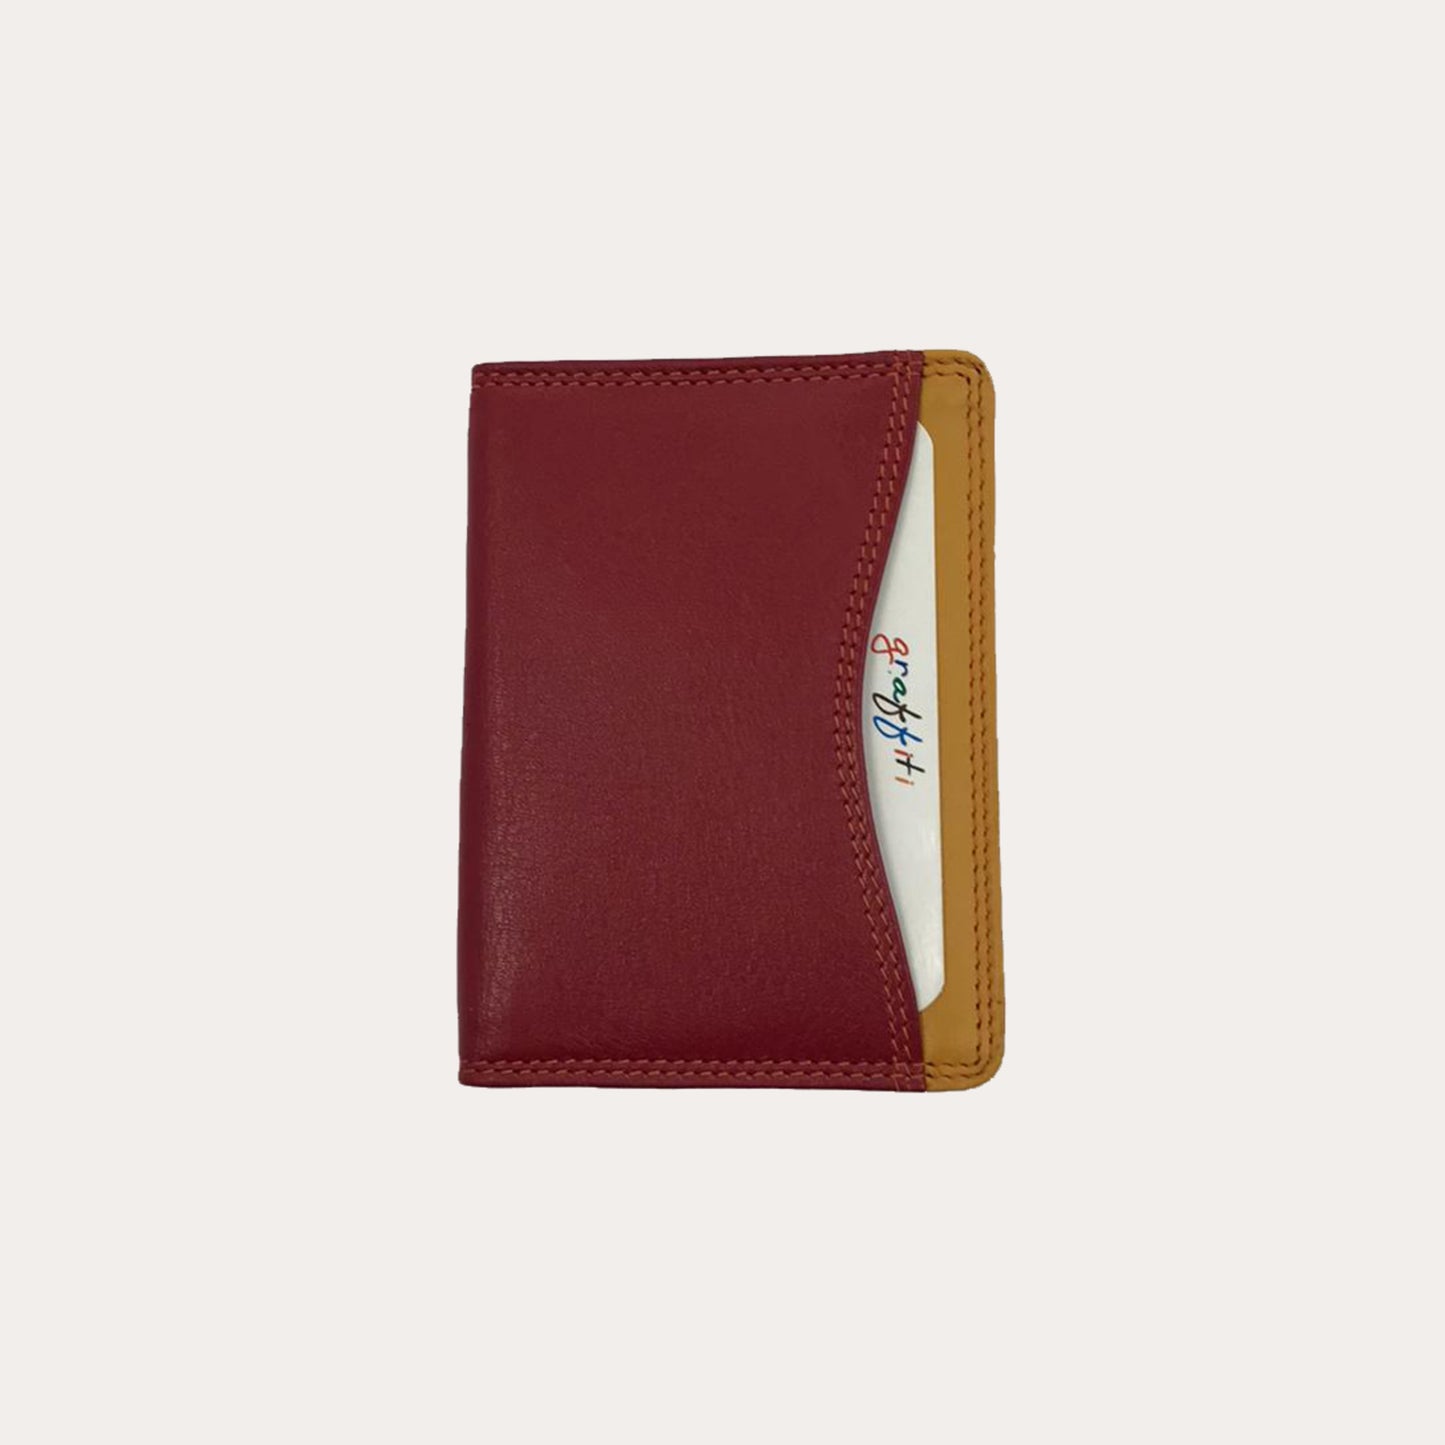 Spice Leather Credit Card or Bus Pass Holder